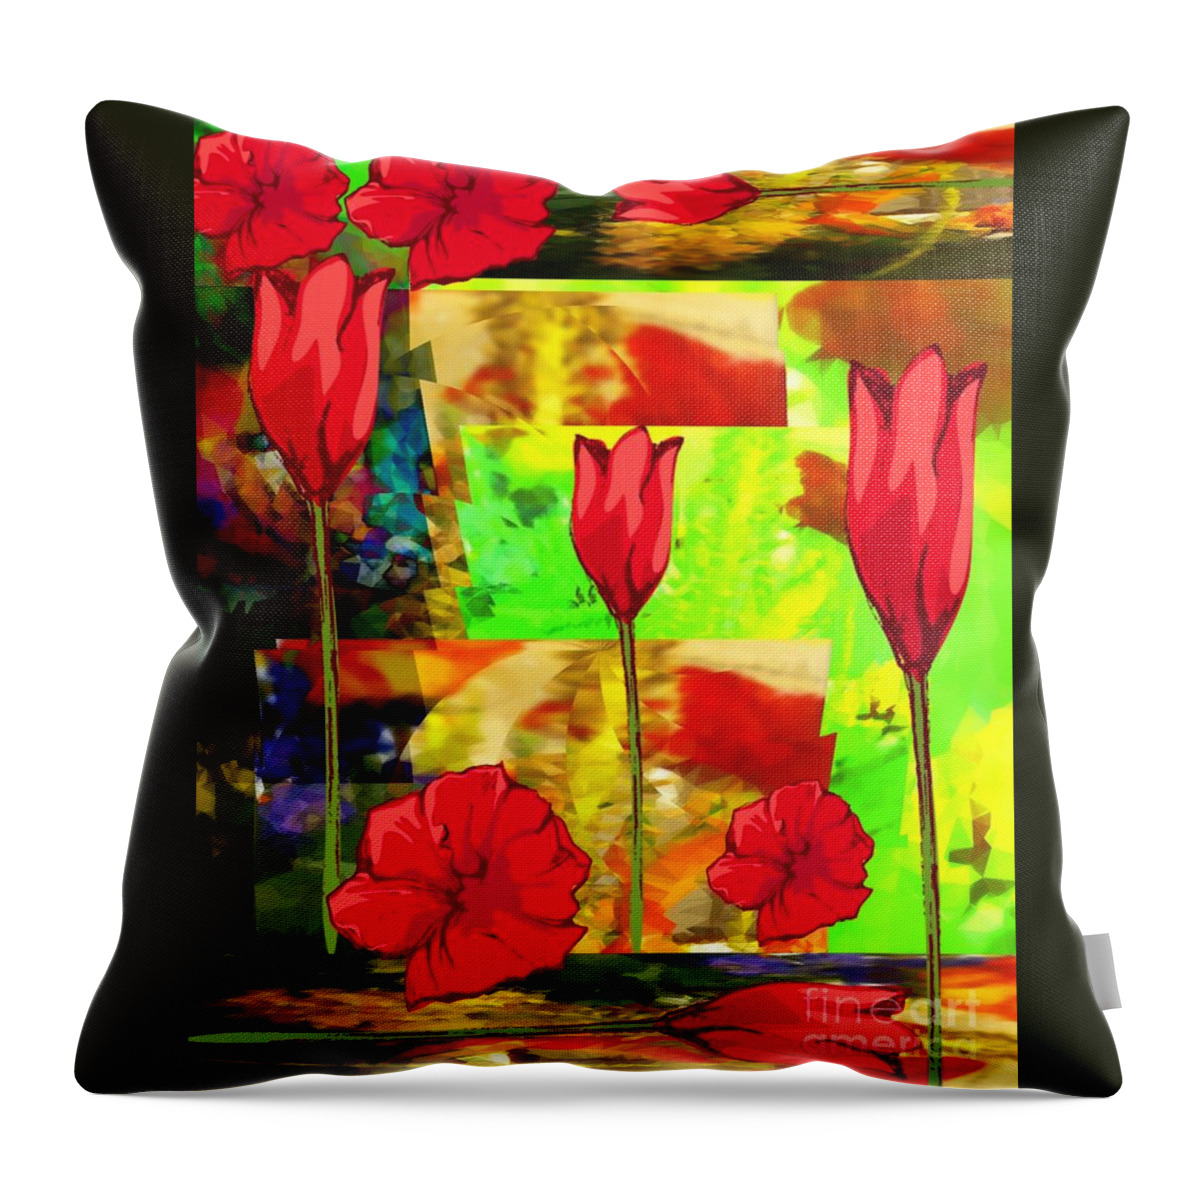 Floral Abstract All Prints And Sizes Gayle Price Thomas Digital Art Abstract Throw Pillow featuring the digital art Flowers in the Mist by Gayle Price Thomas